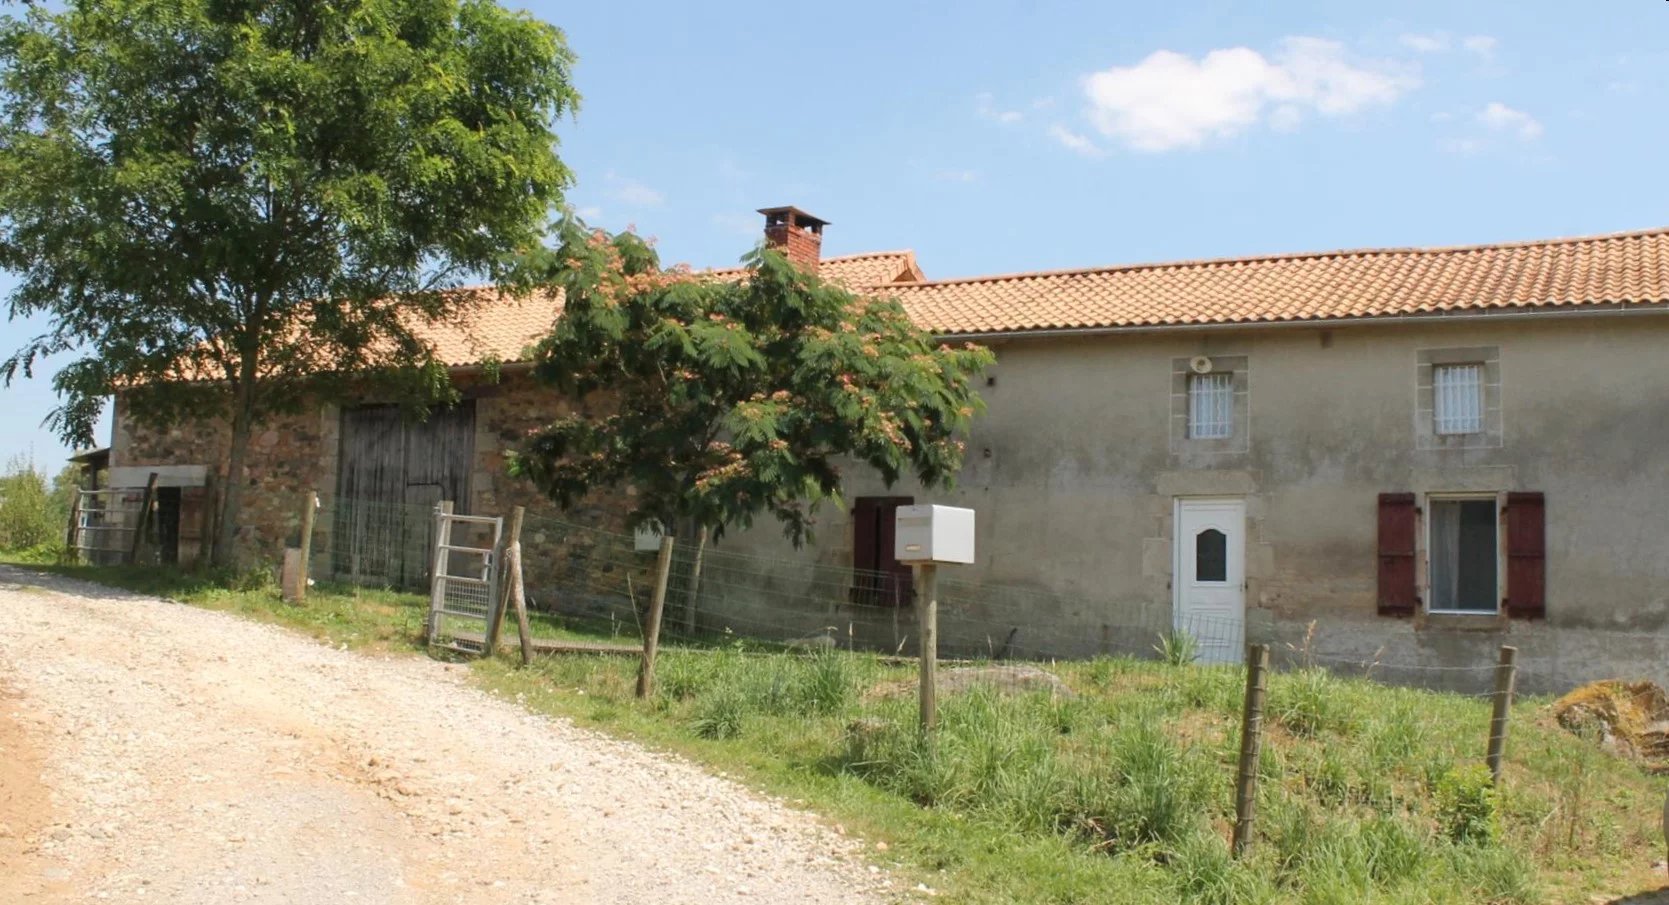 An old farmhouse, entirely renovated, ideal for having horses